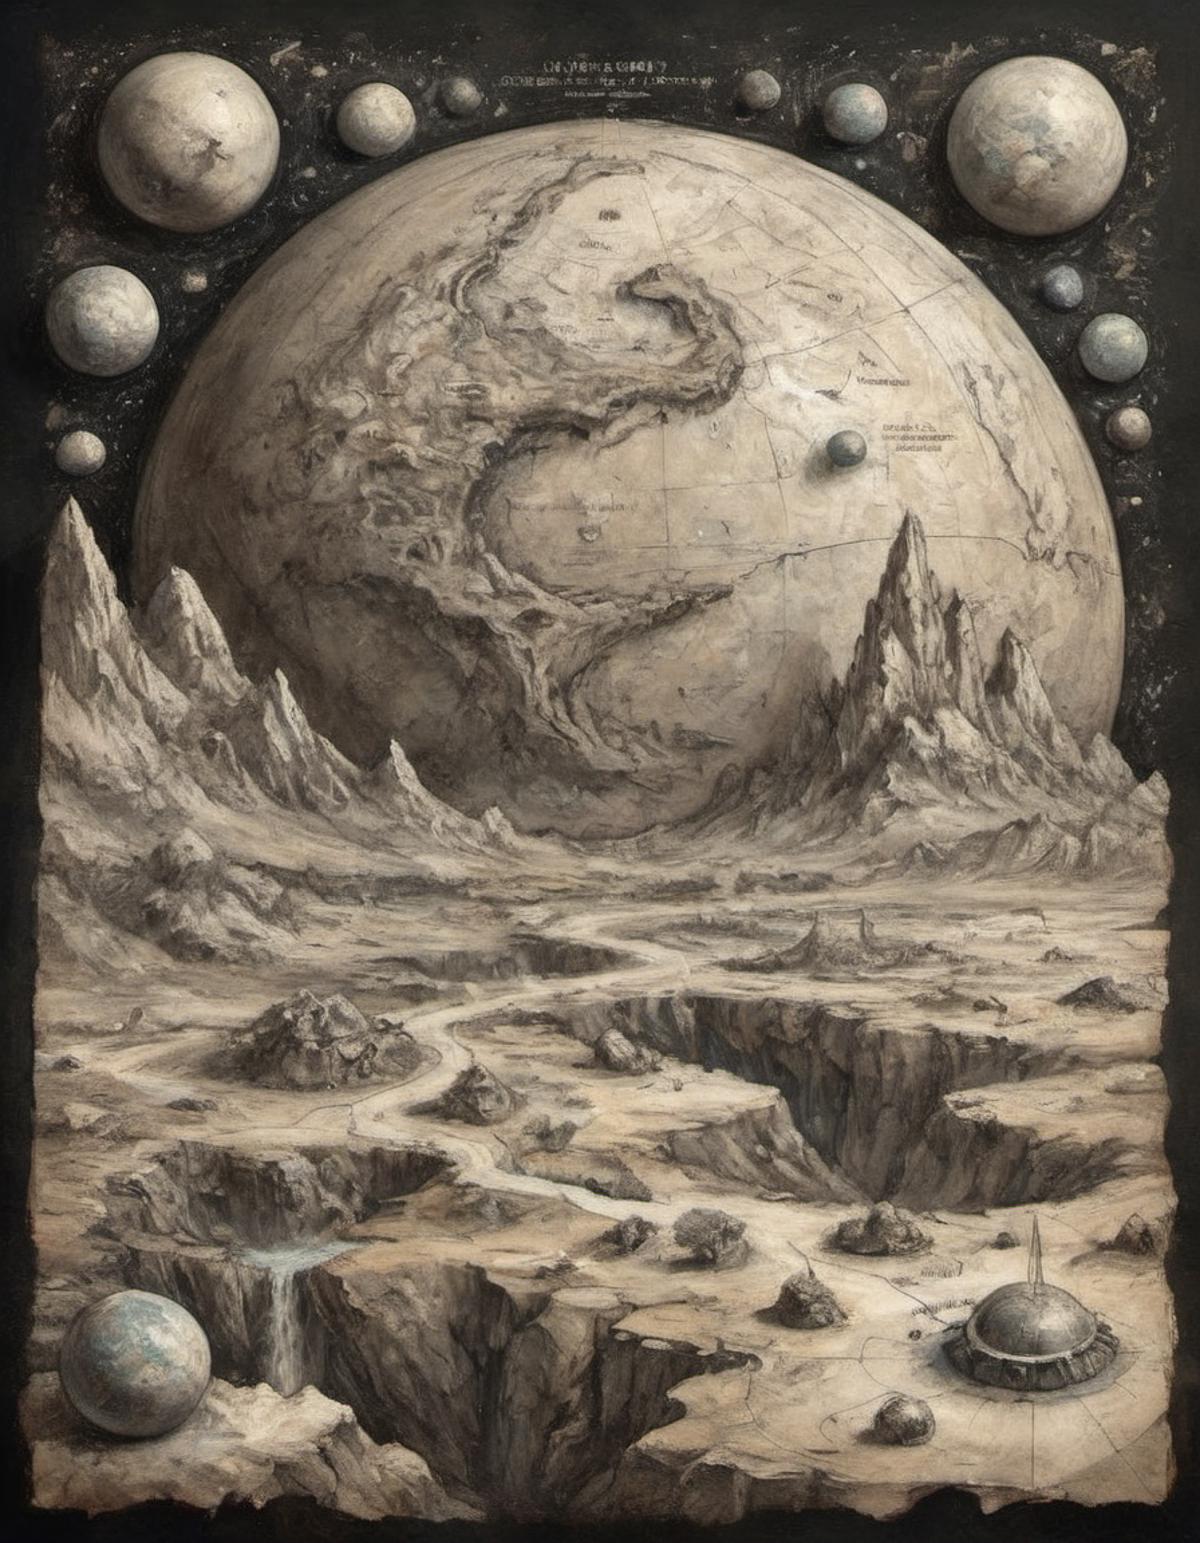 A Planetary Artwork Featuring a Planet, Mountains, and Craters